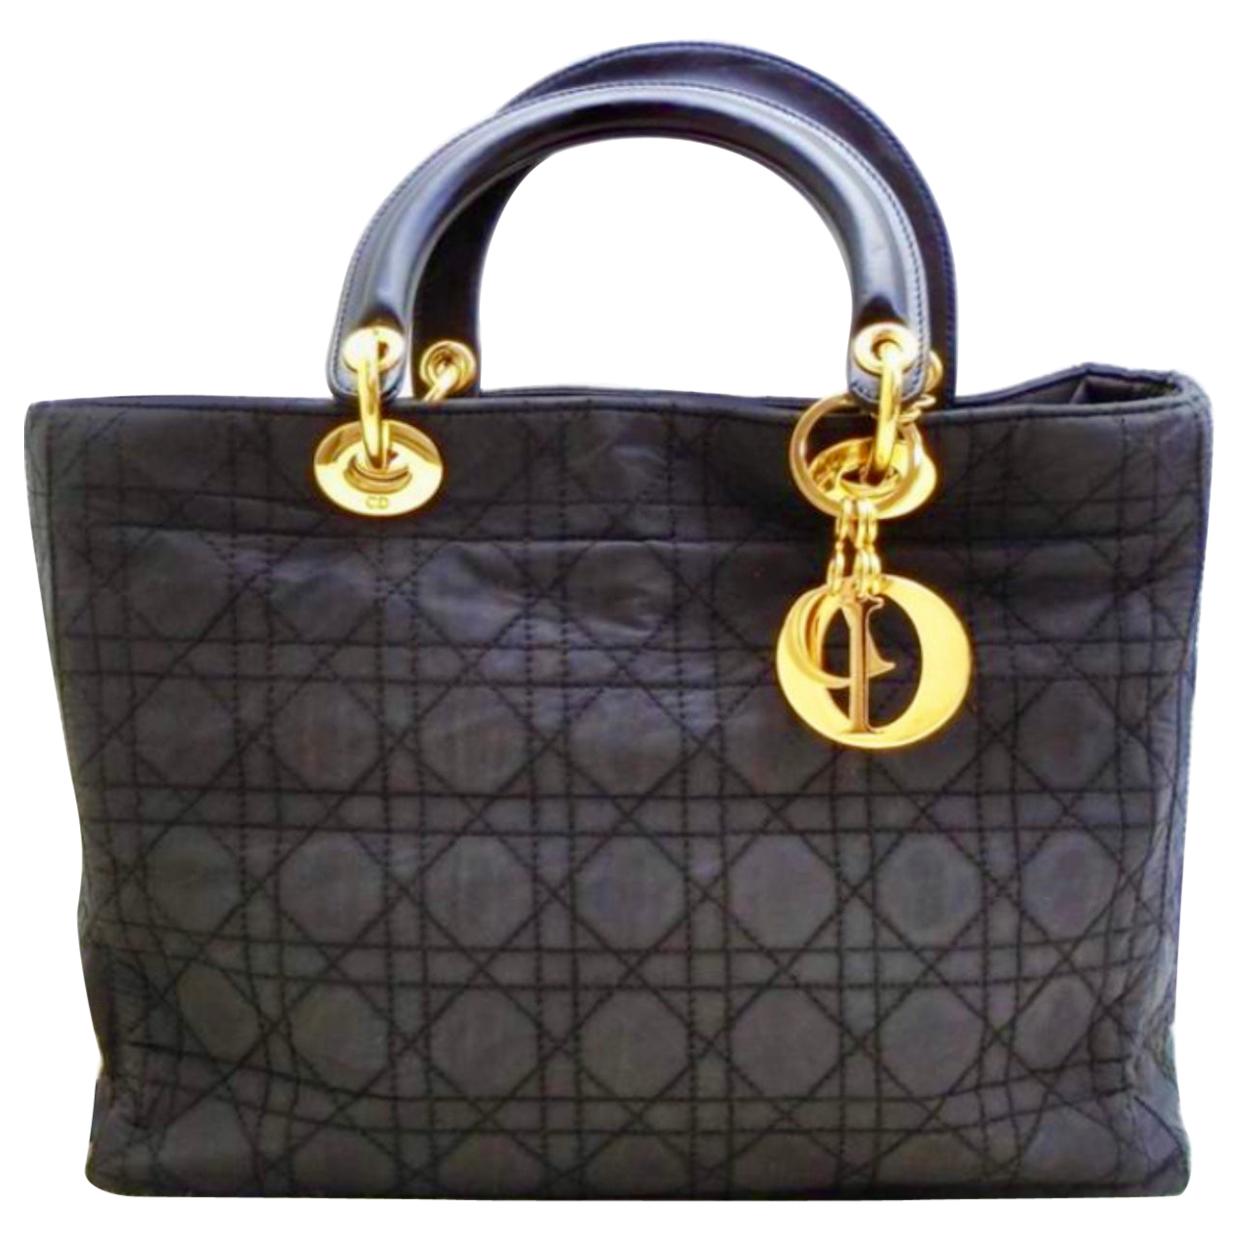 Is My Lady Dior Fake or Vintage Reveal  Story Time  eBay Valet  How to  Authenticate  YouTube